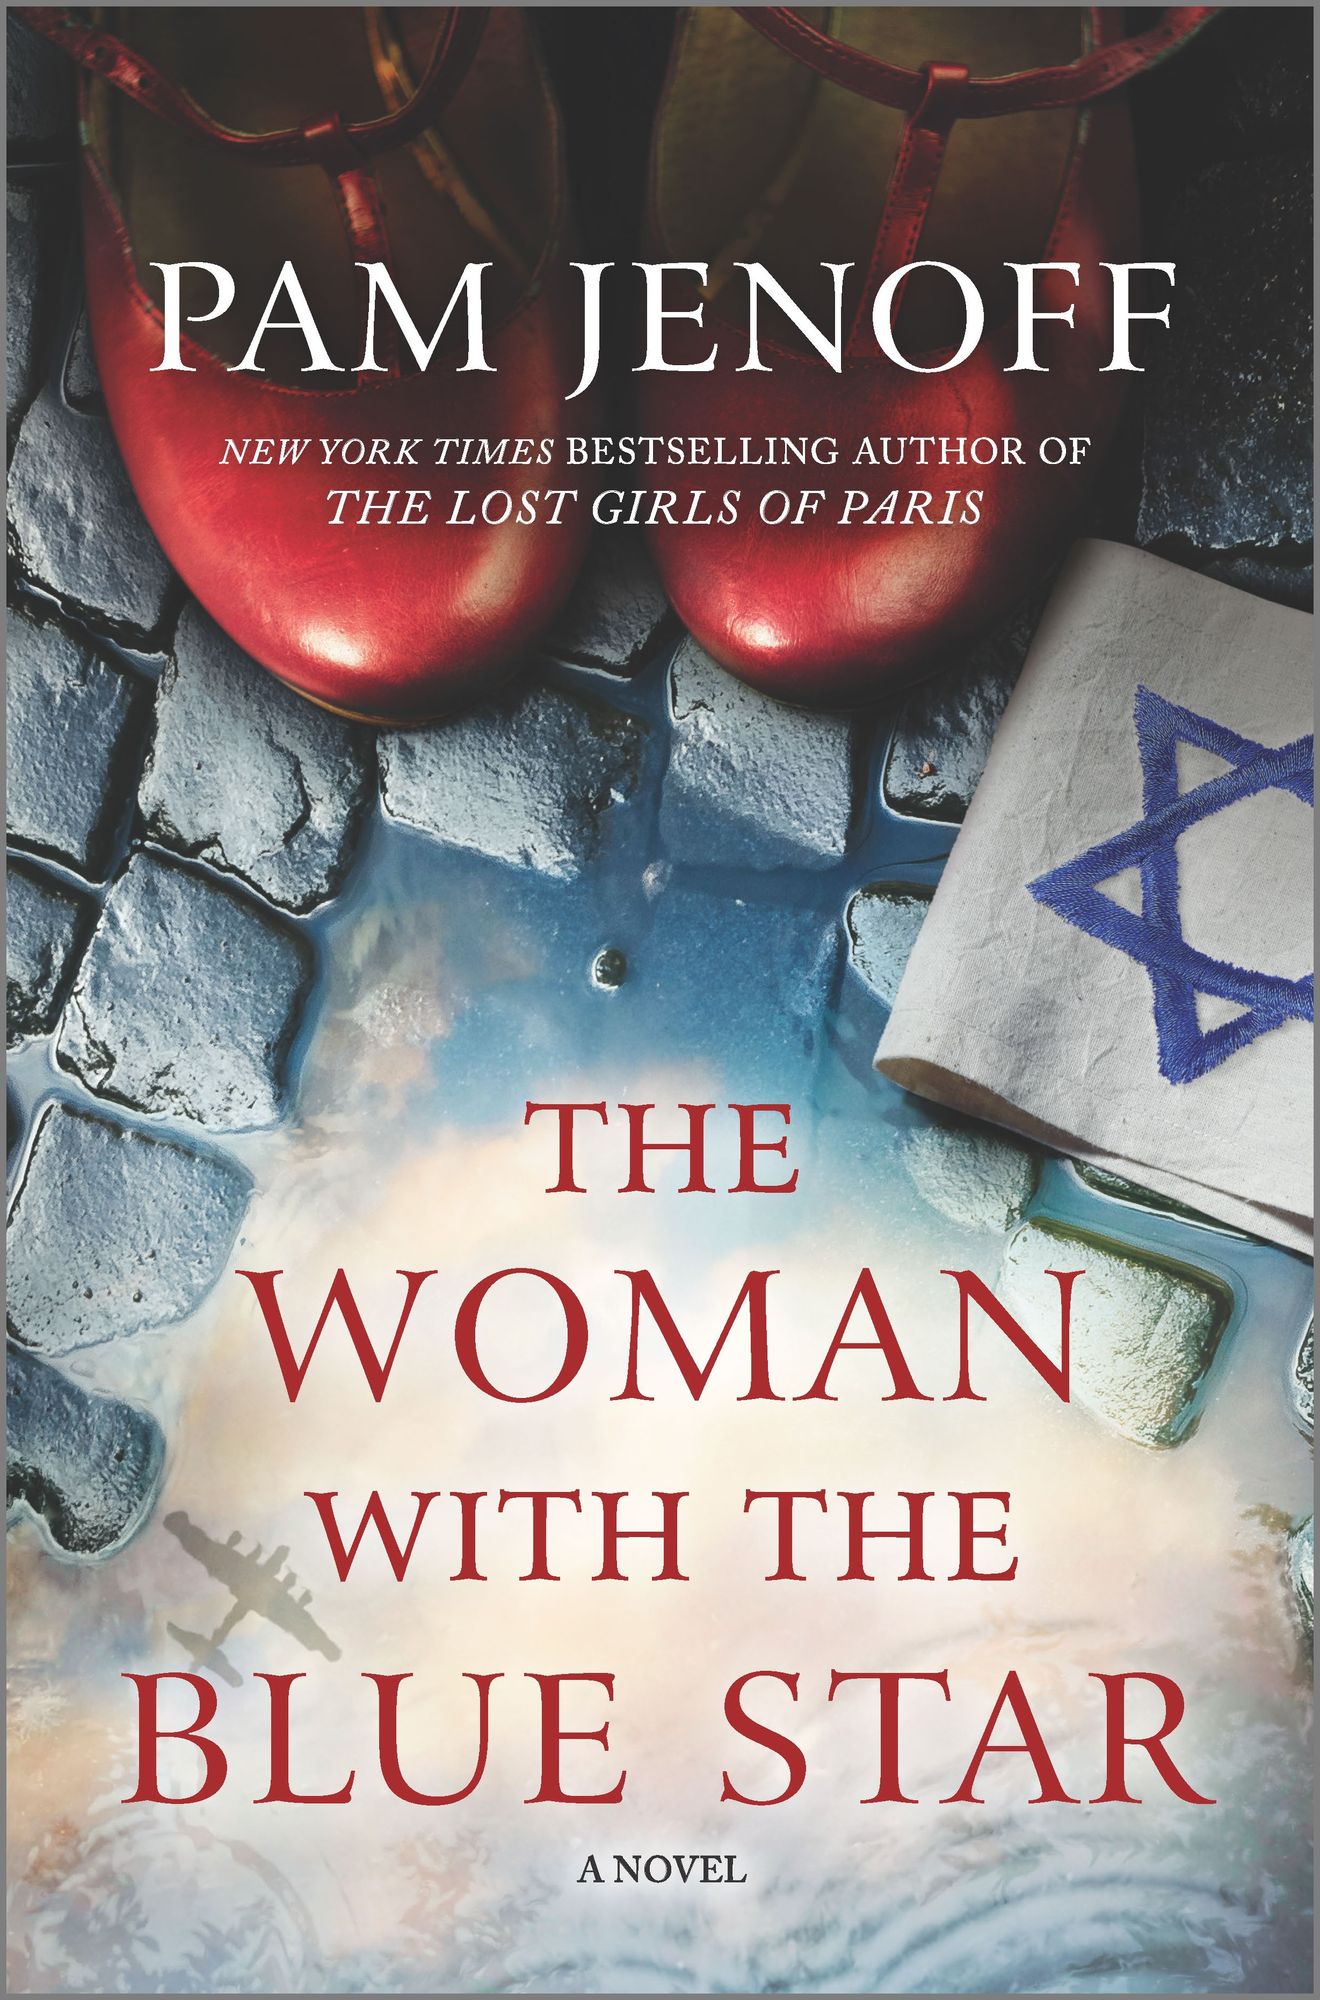 The Woman With The Blue Star by Pam Jenoff